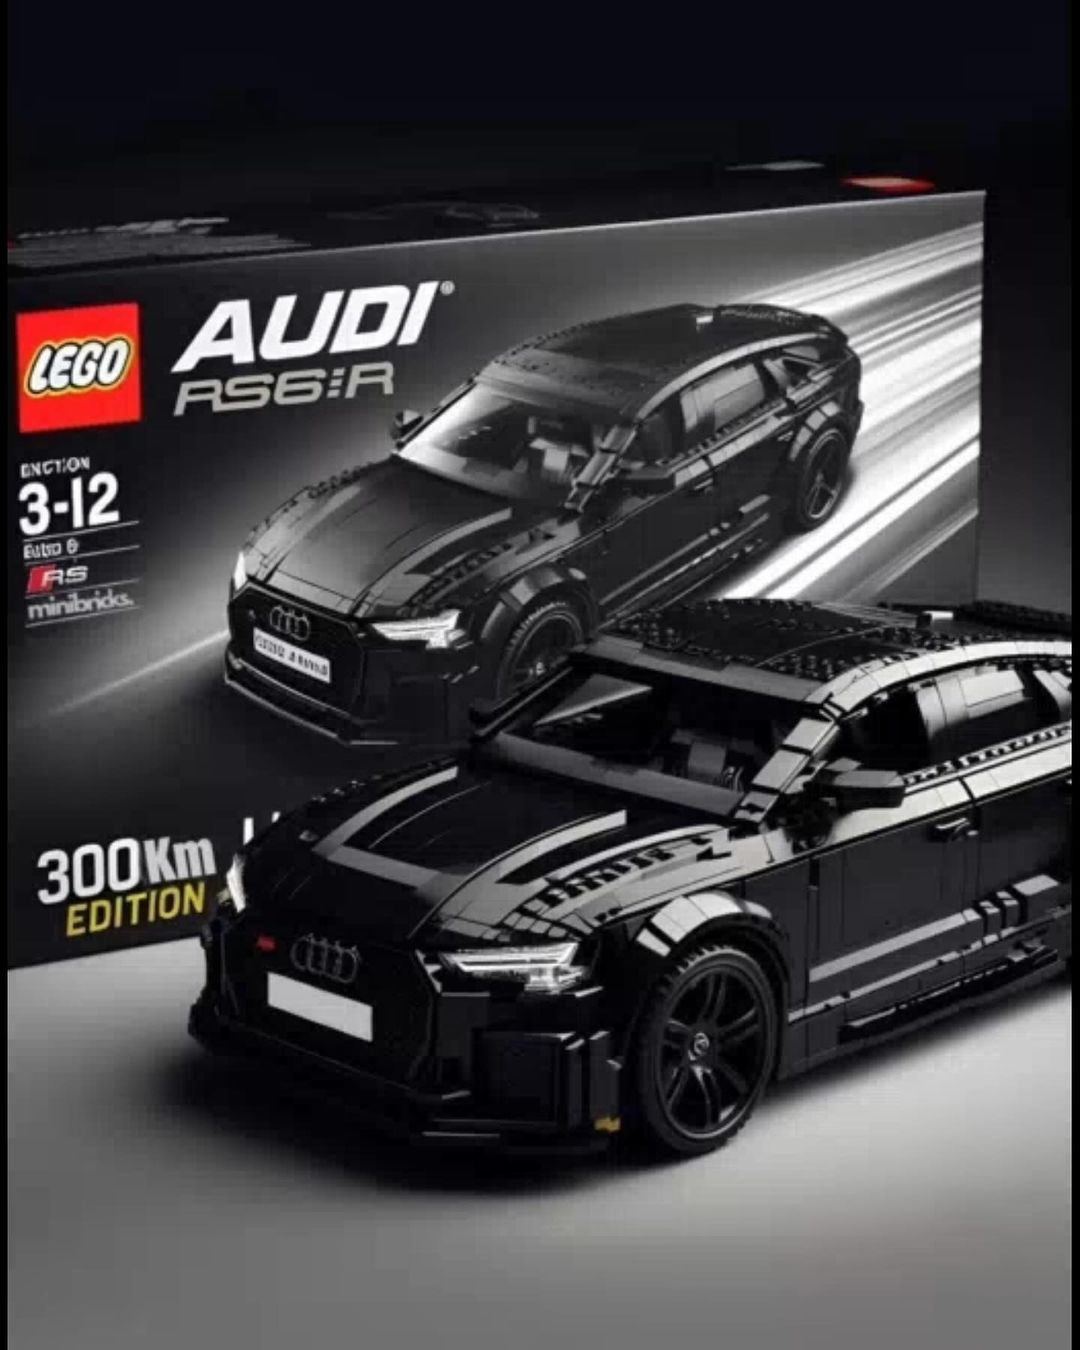 𝑾𝒐𝒓𝒍𝒅𝑾𝒊𝒅𝒆𝑪𝒂𝒓𝒔™ on X: Would you buy this Lego Audi RS6-R?   / X